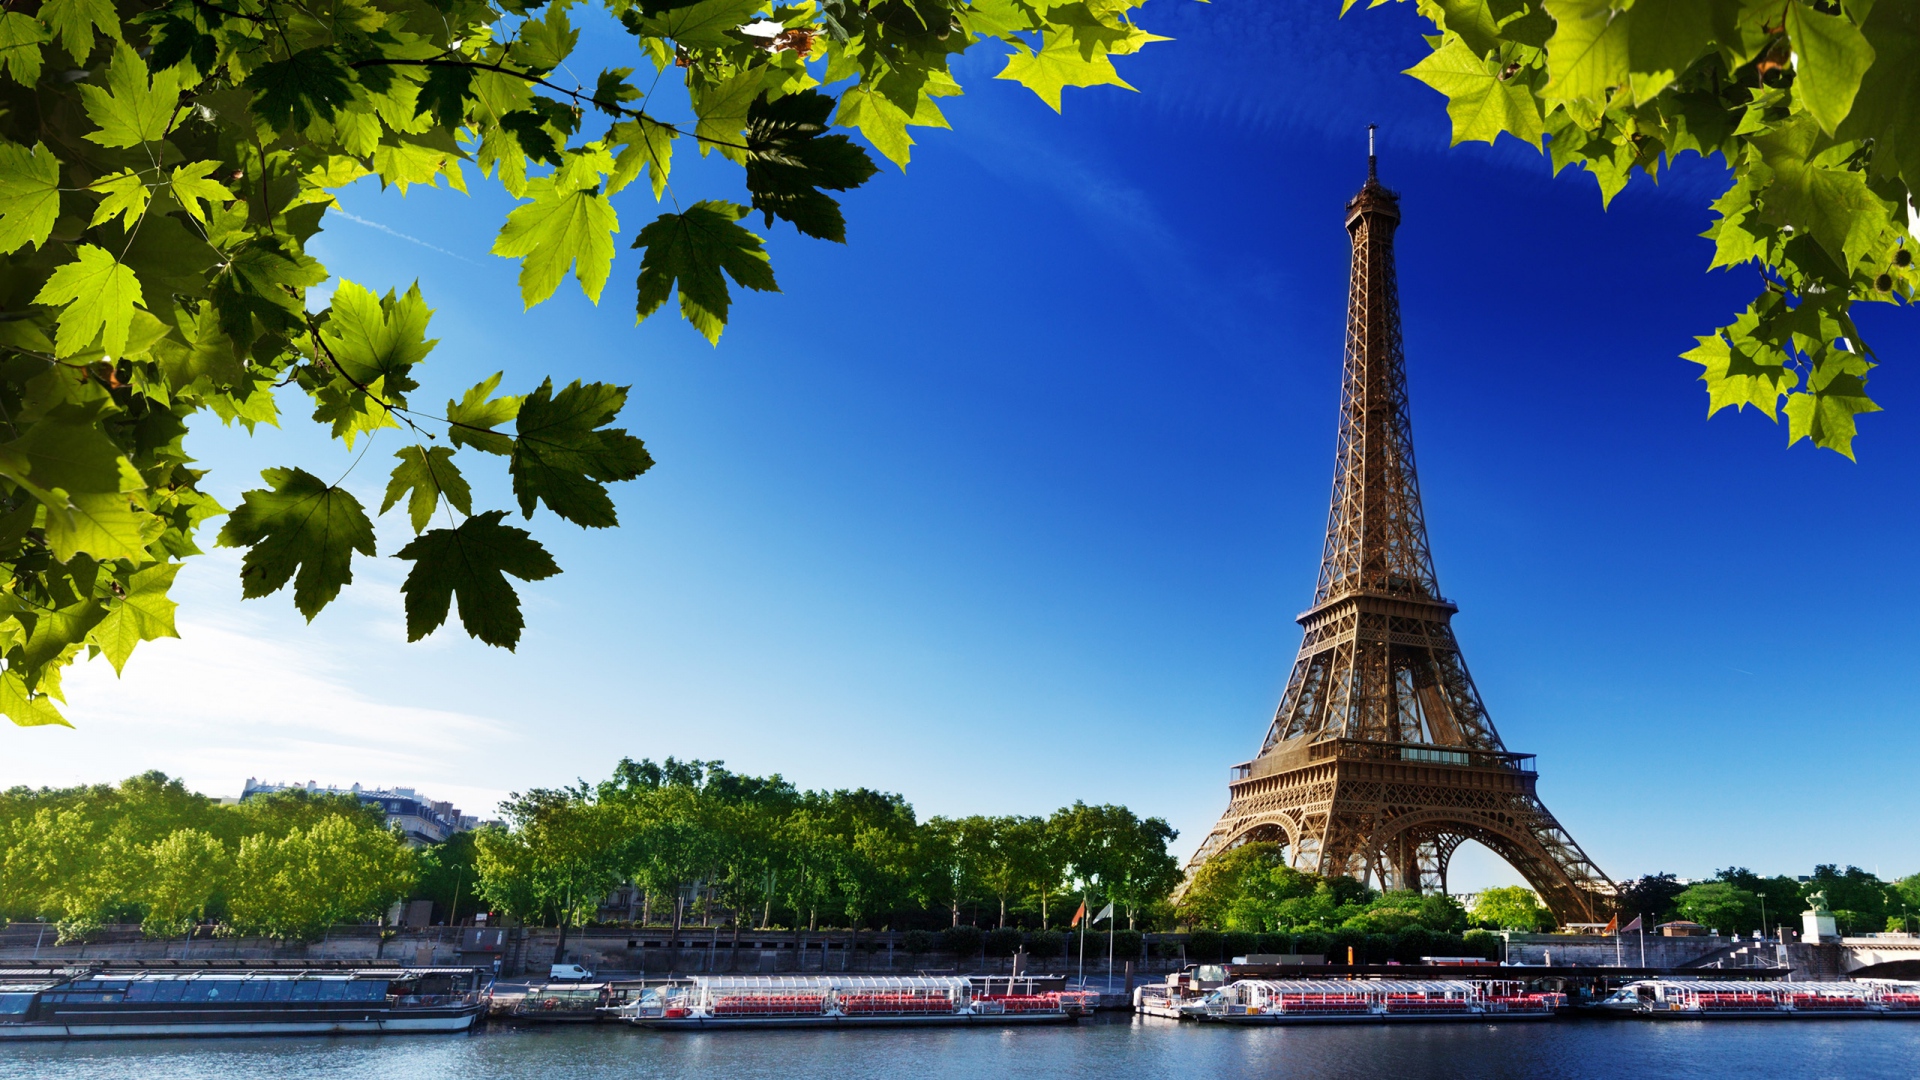 35 Hd Paris Backgrounds The City Of Lights And Romance HD Wallpapers Download Free Images Wallpaper [wallpaper981.blogspot.com]